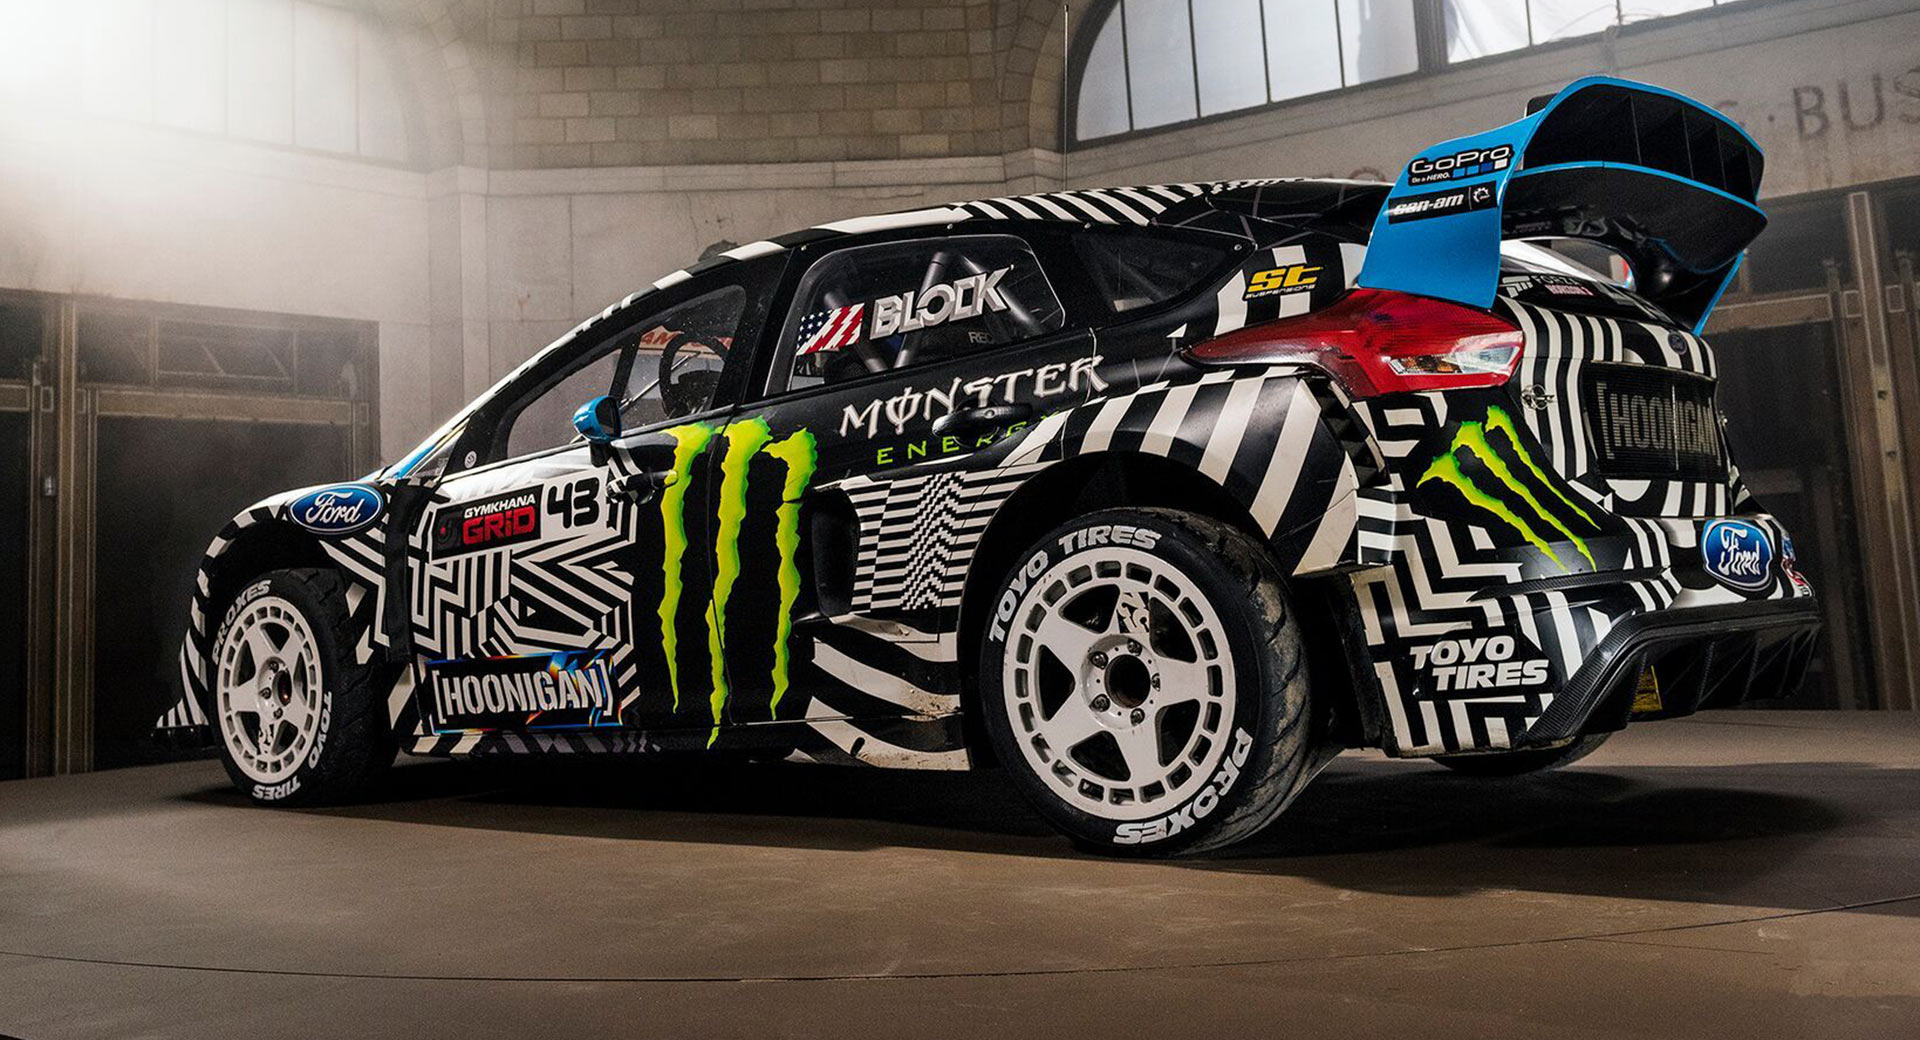 Ken Block's Gymkhana 10 will be 'the best one ever